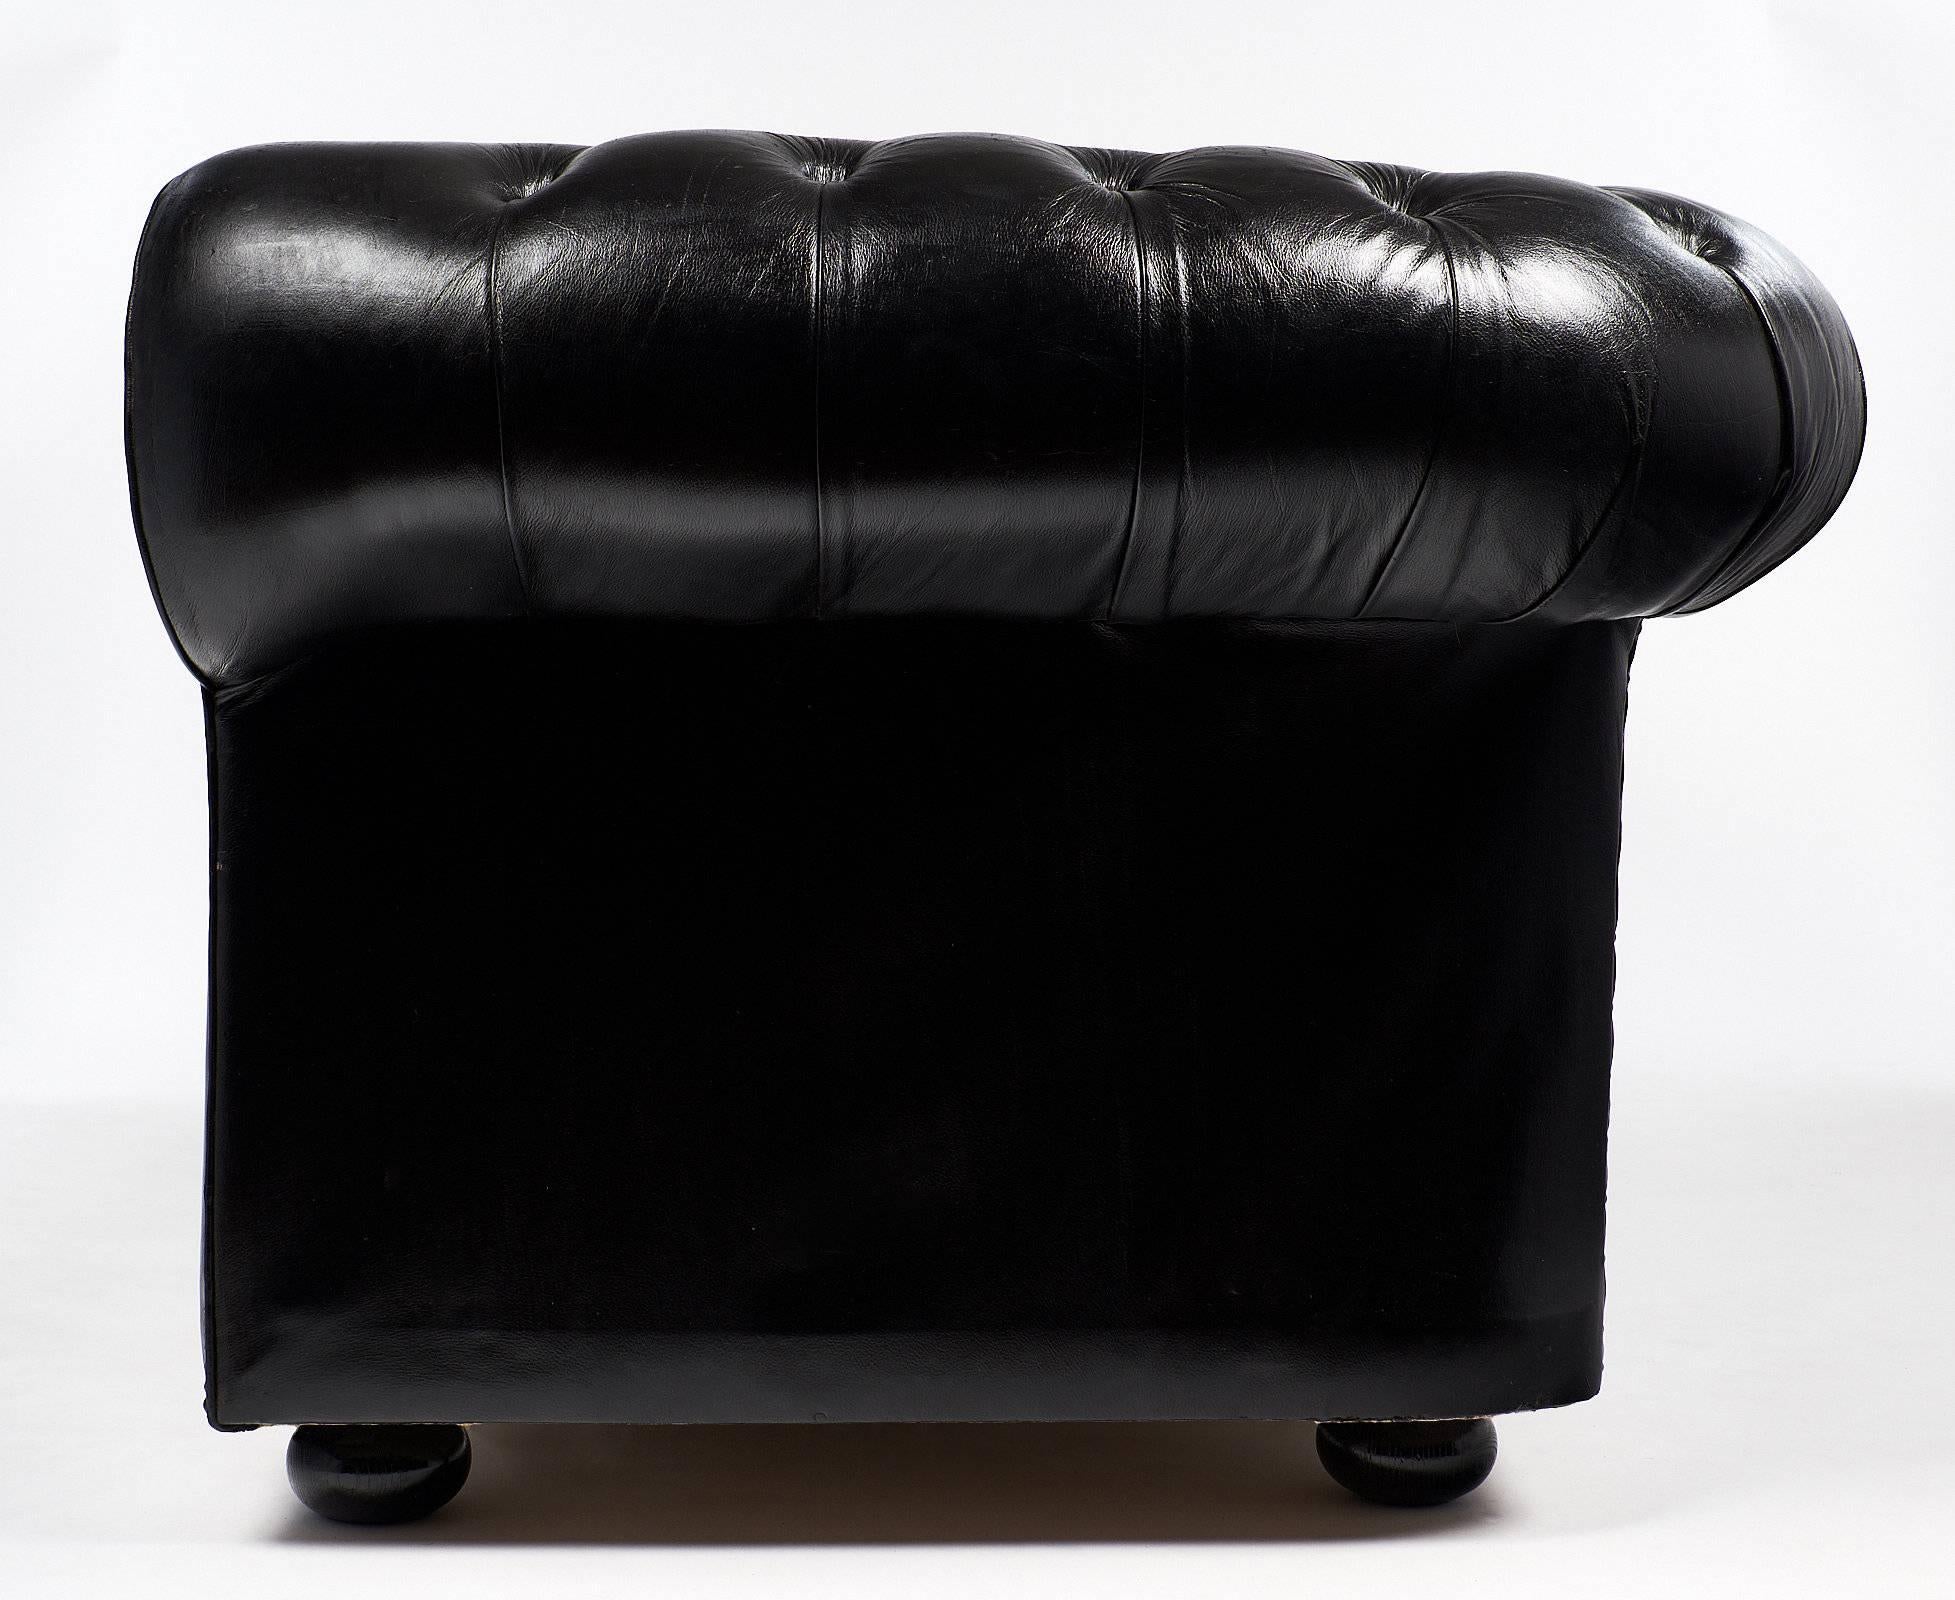 Mid-20th Century English Vintage Black Leather Chesterfield Sofa